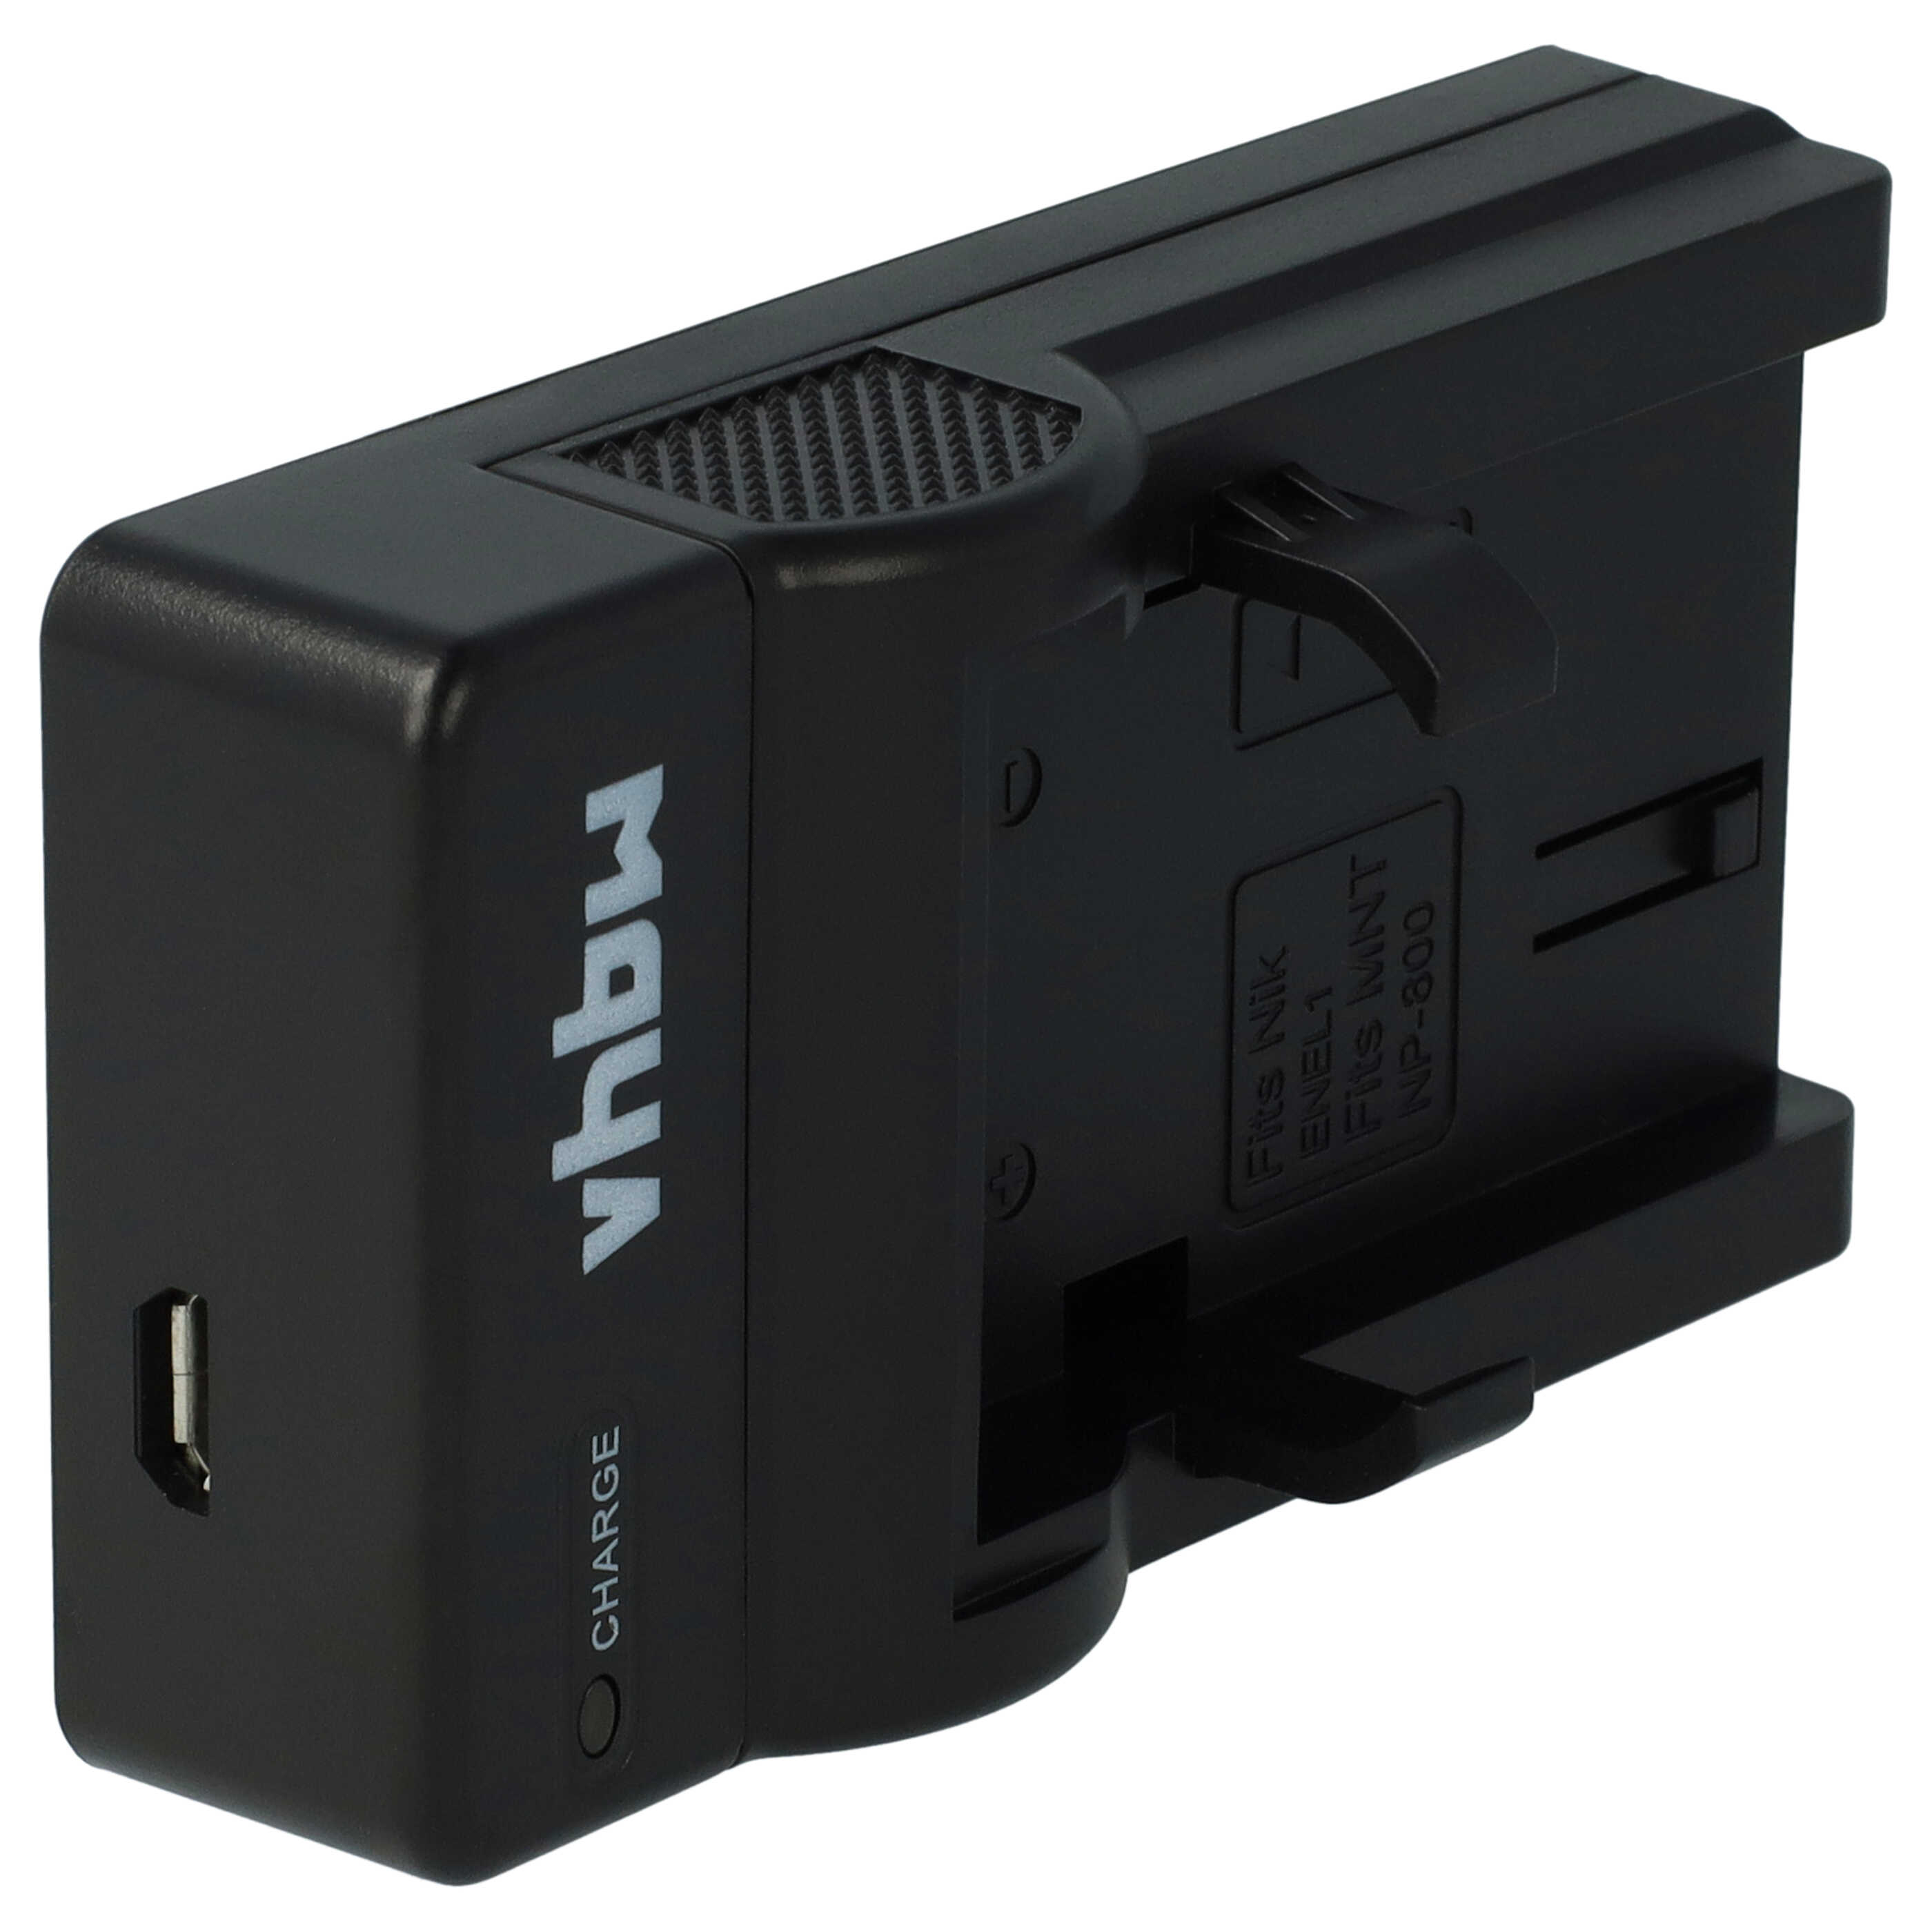 Battery Charger suitable for Coolpix E880 Camera etc. - 0.5 A, 8.4 V